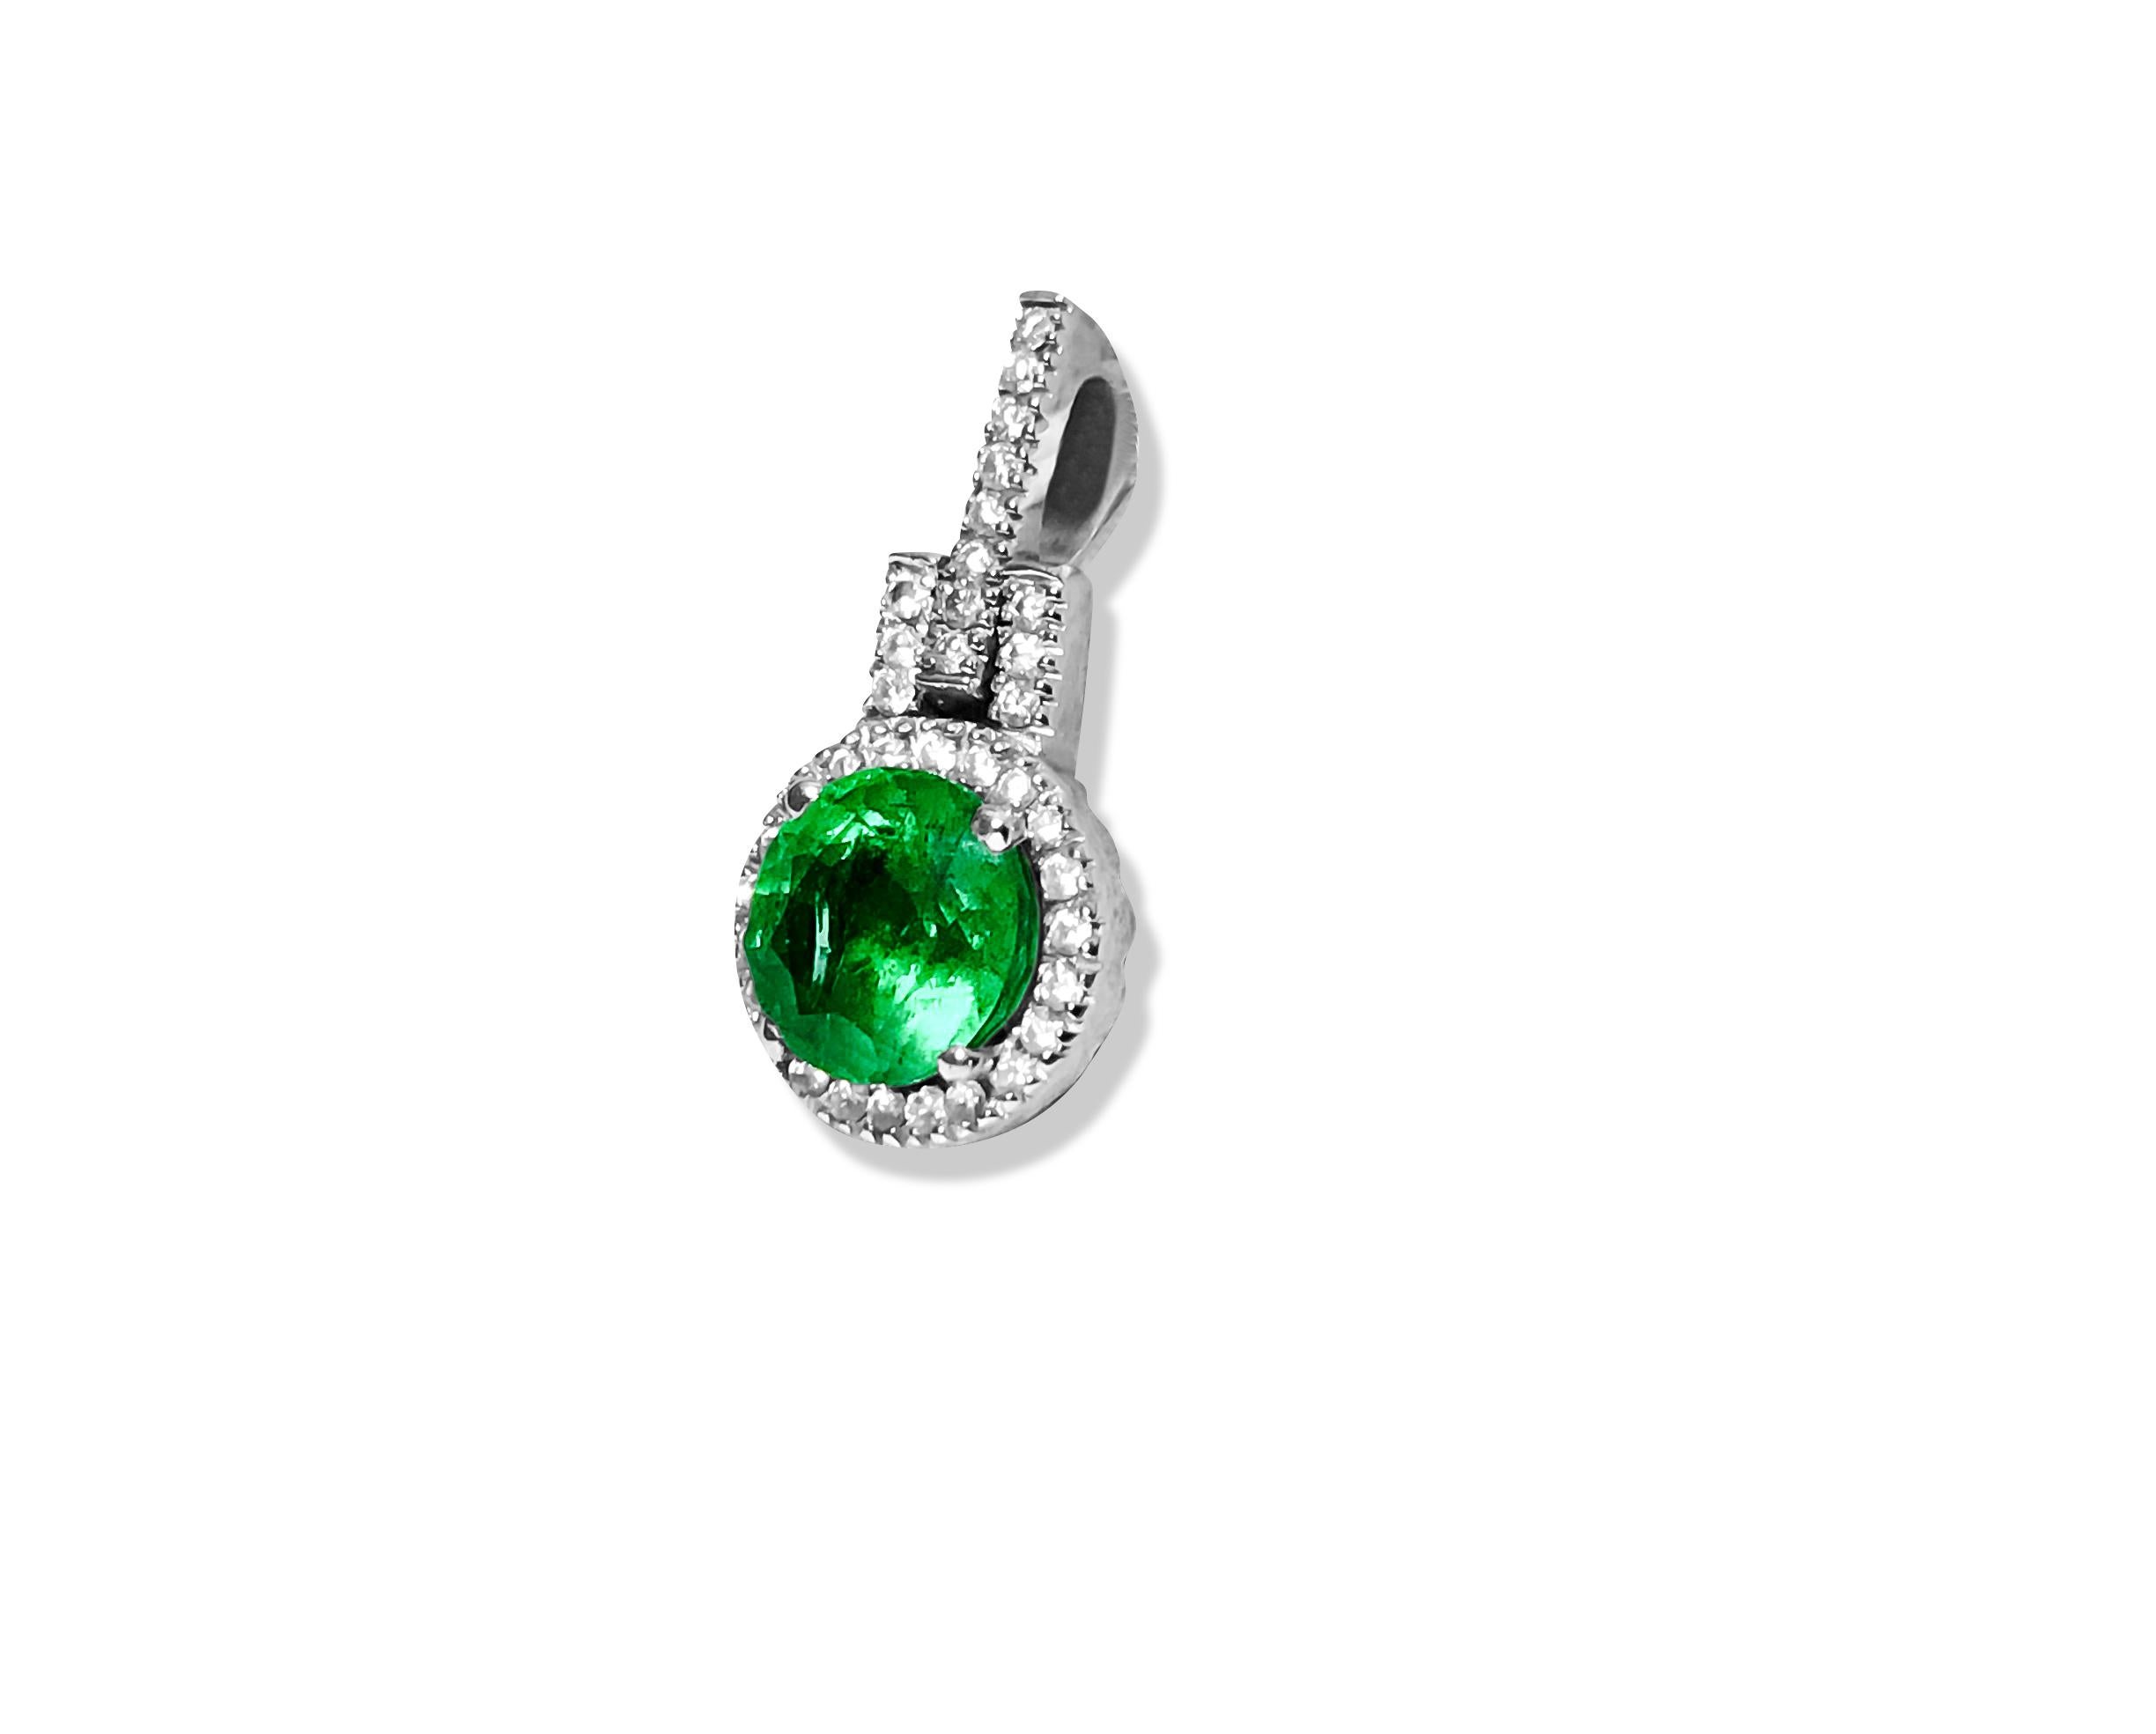 Crafted from elegant 14K white gold, this pendant showcases a captivating 2.00-carat round-cut emerald, securely nestled in a prong setting. Encircling the emerald are dazzling diamonds totaling 1.20 carats, boasting VS-SI clarity and G color. With